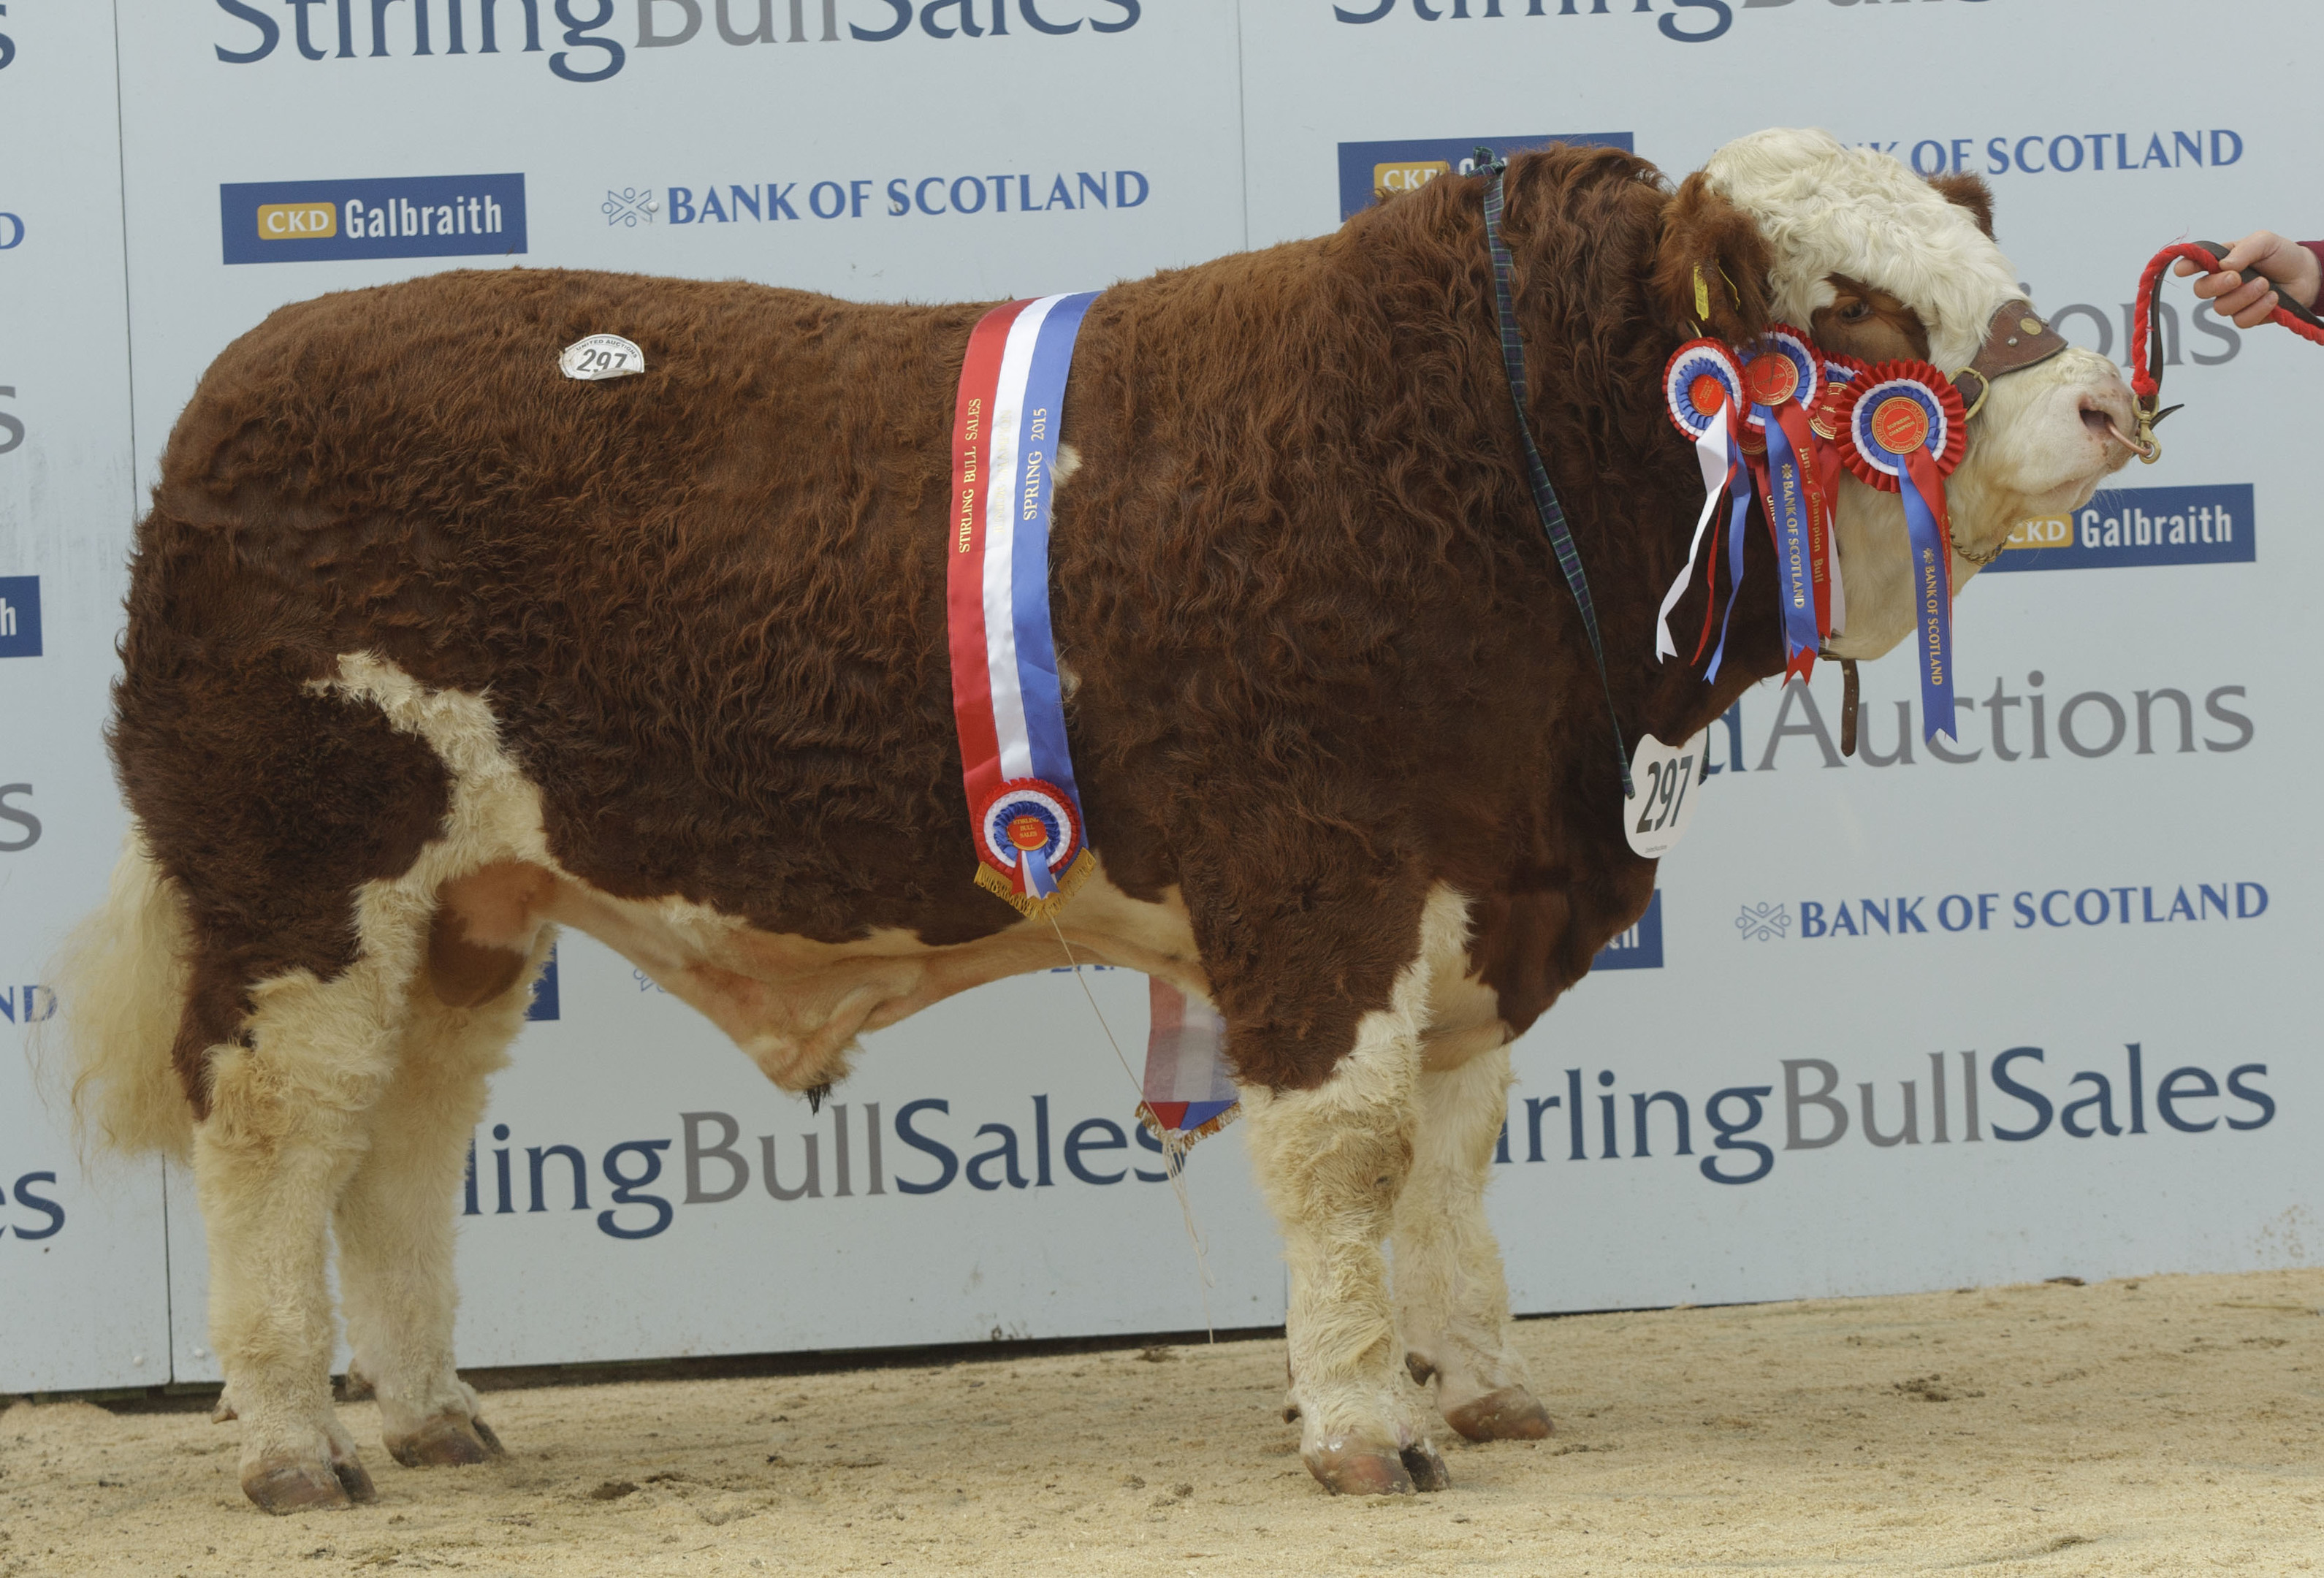 Simmentals top 12,000gn at Stirling Bull Sales